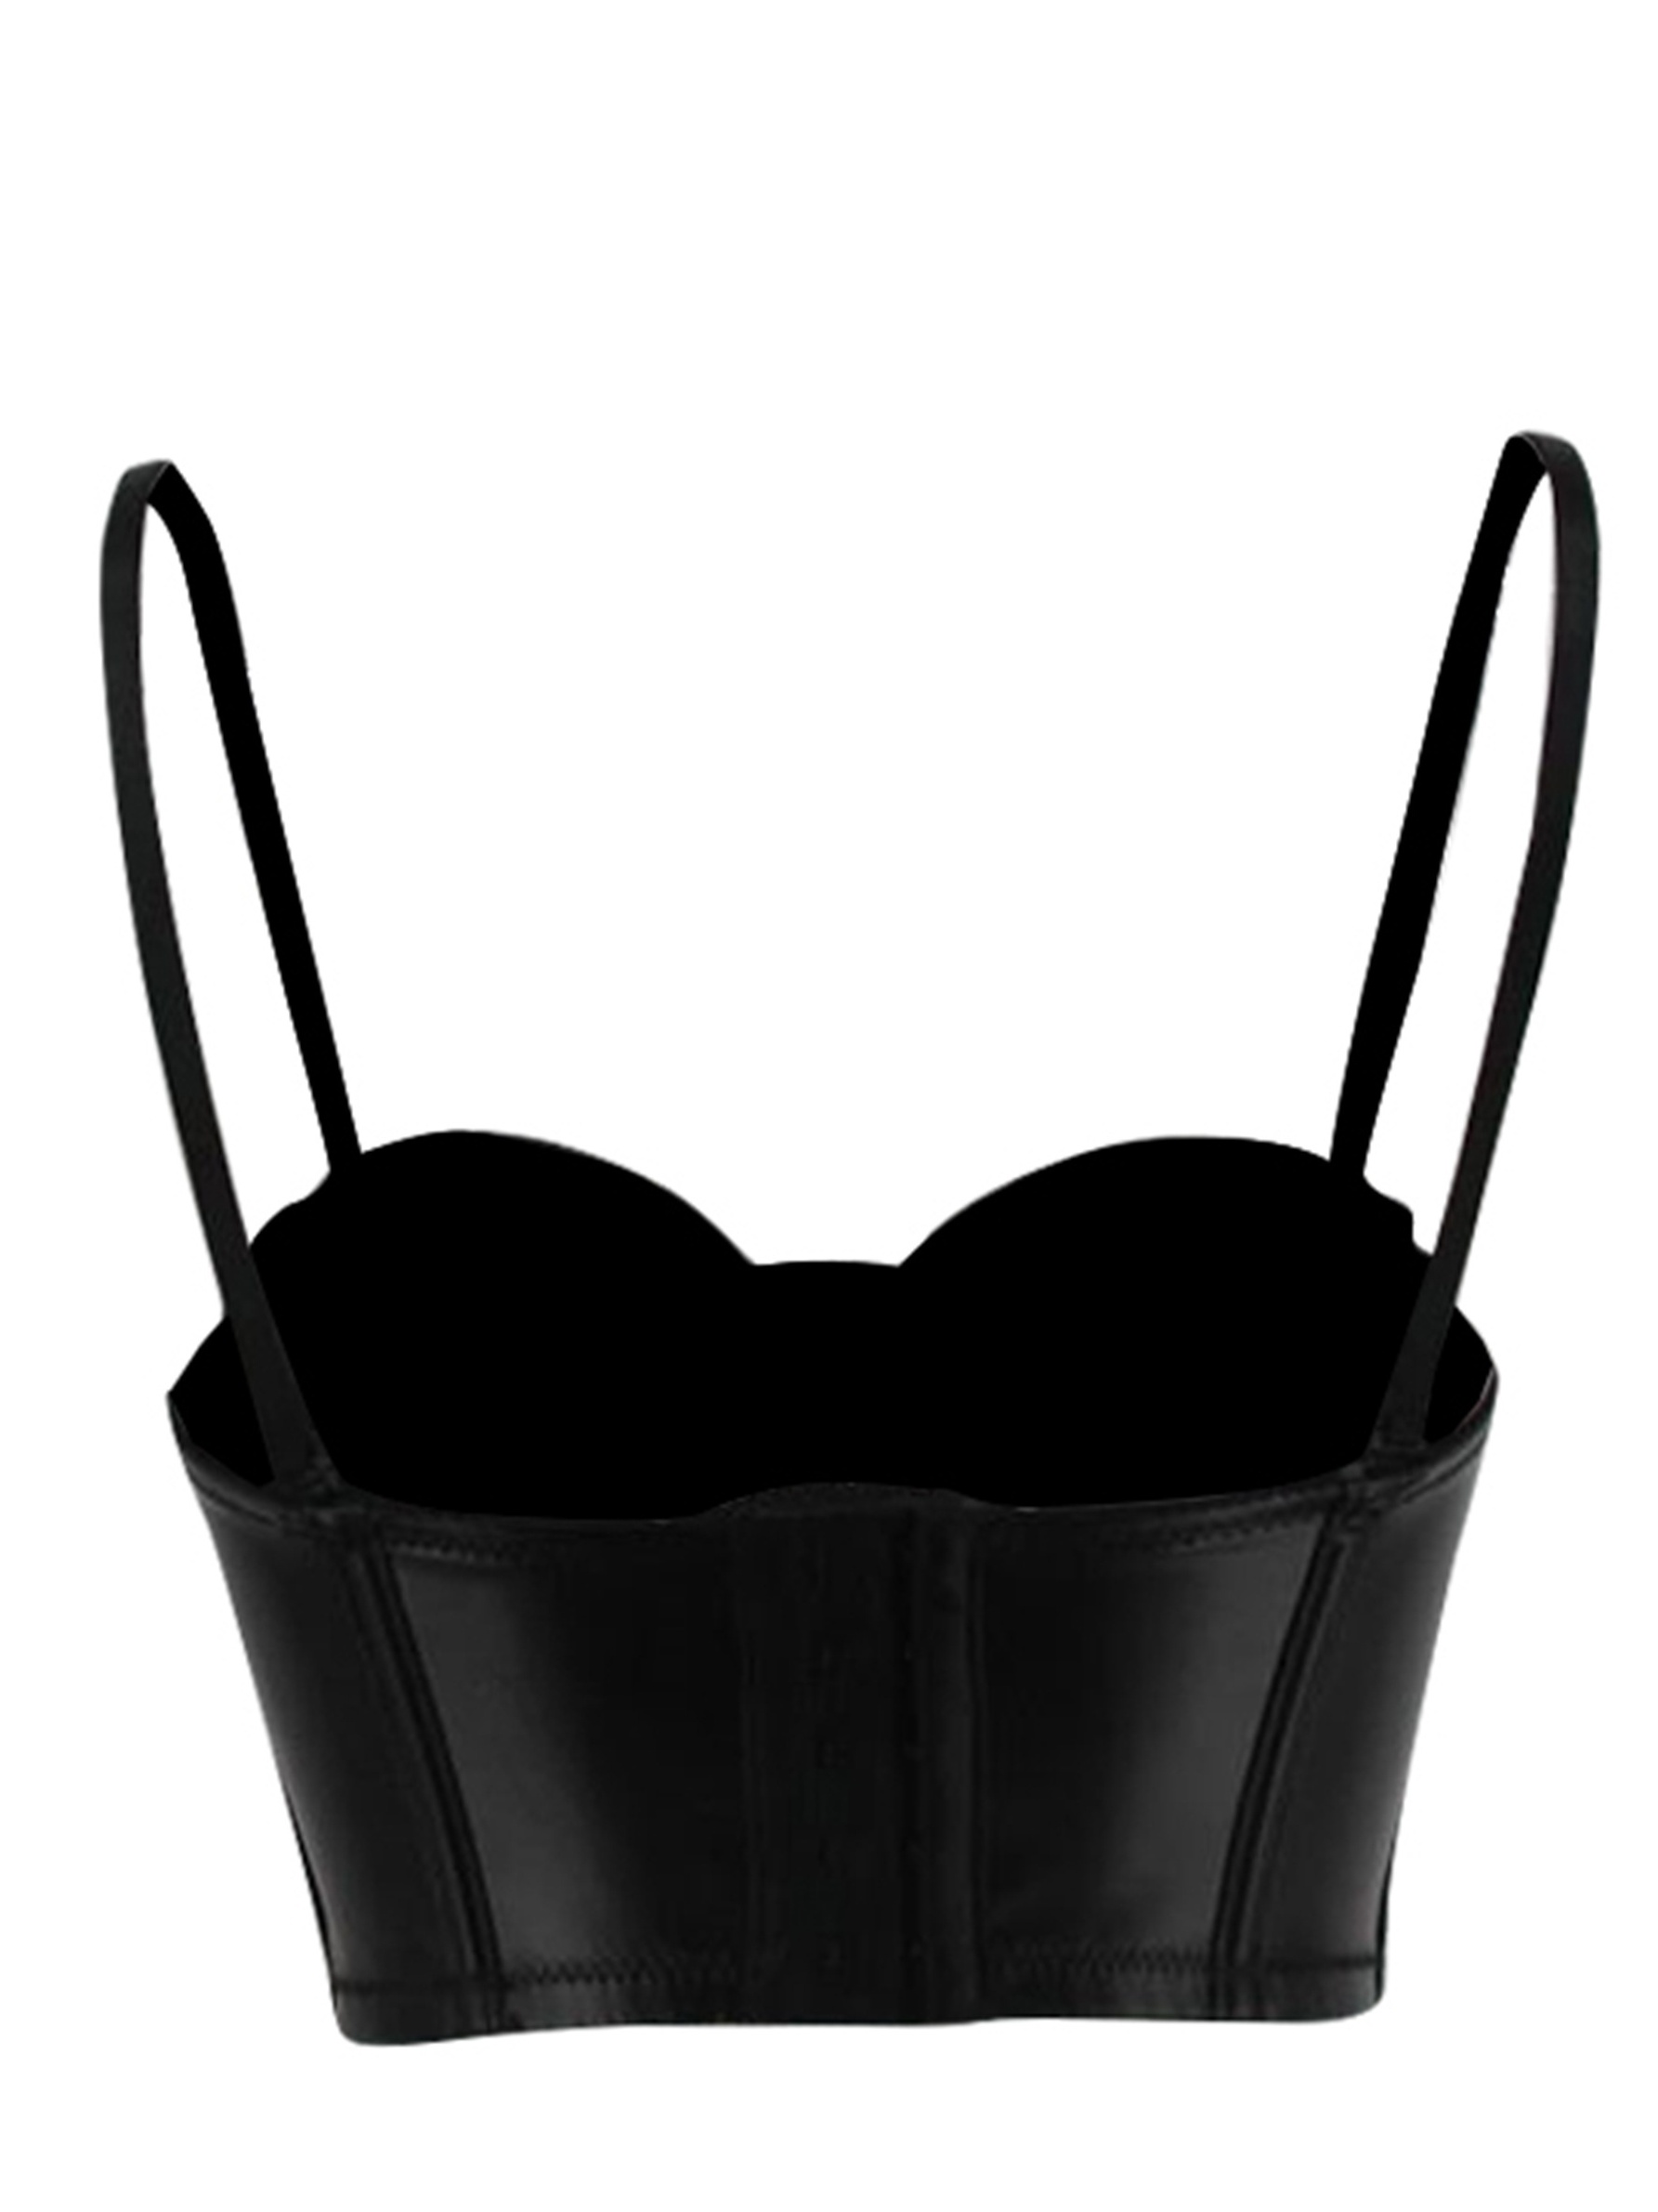 PU Leather Black Bustier Cami Top, Sexy V Neck Push Up Solid Corset,  Women's Underwear & Lingerie